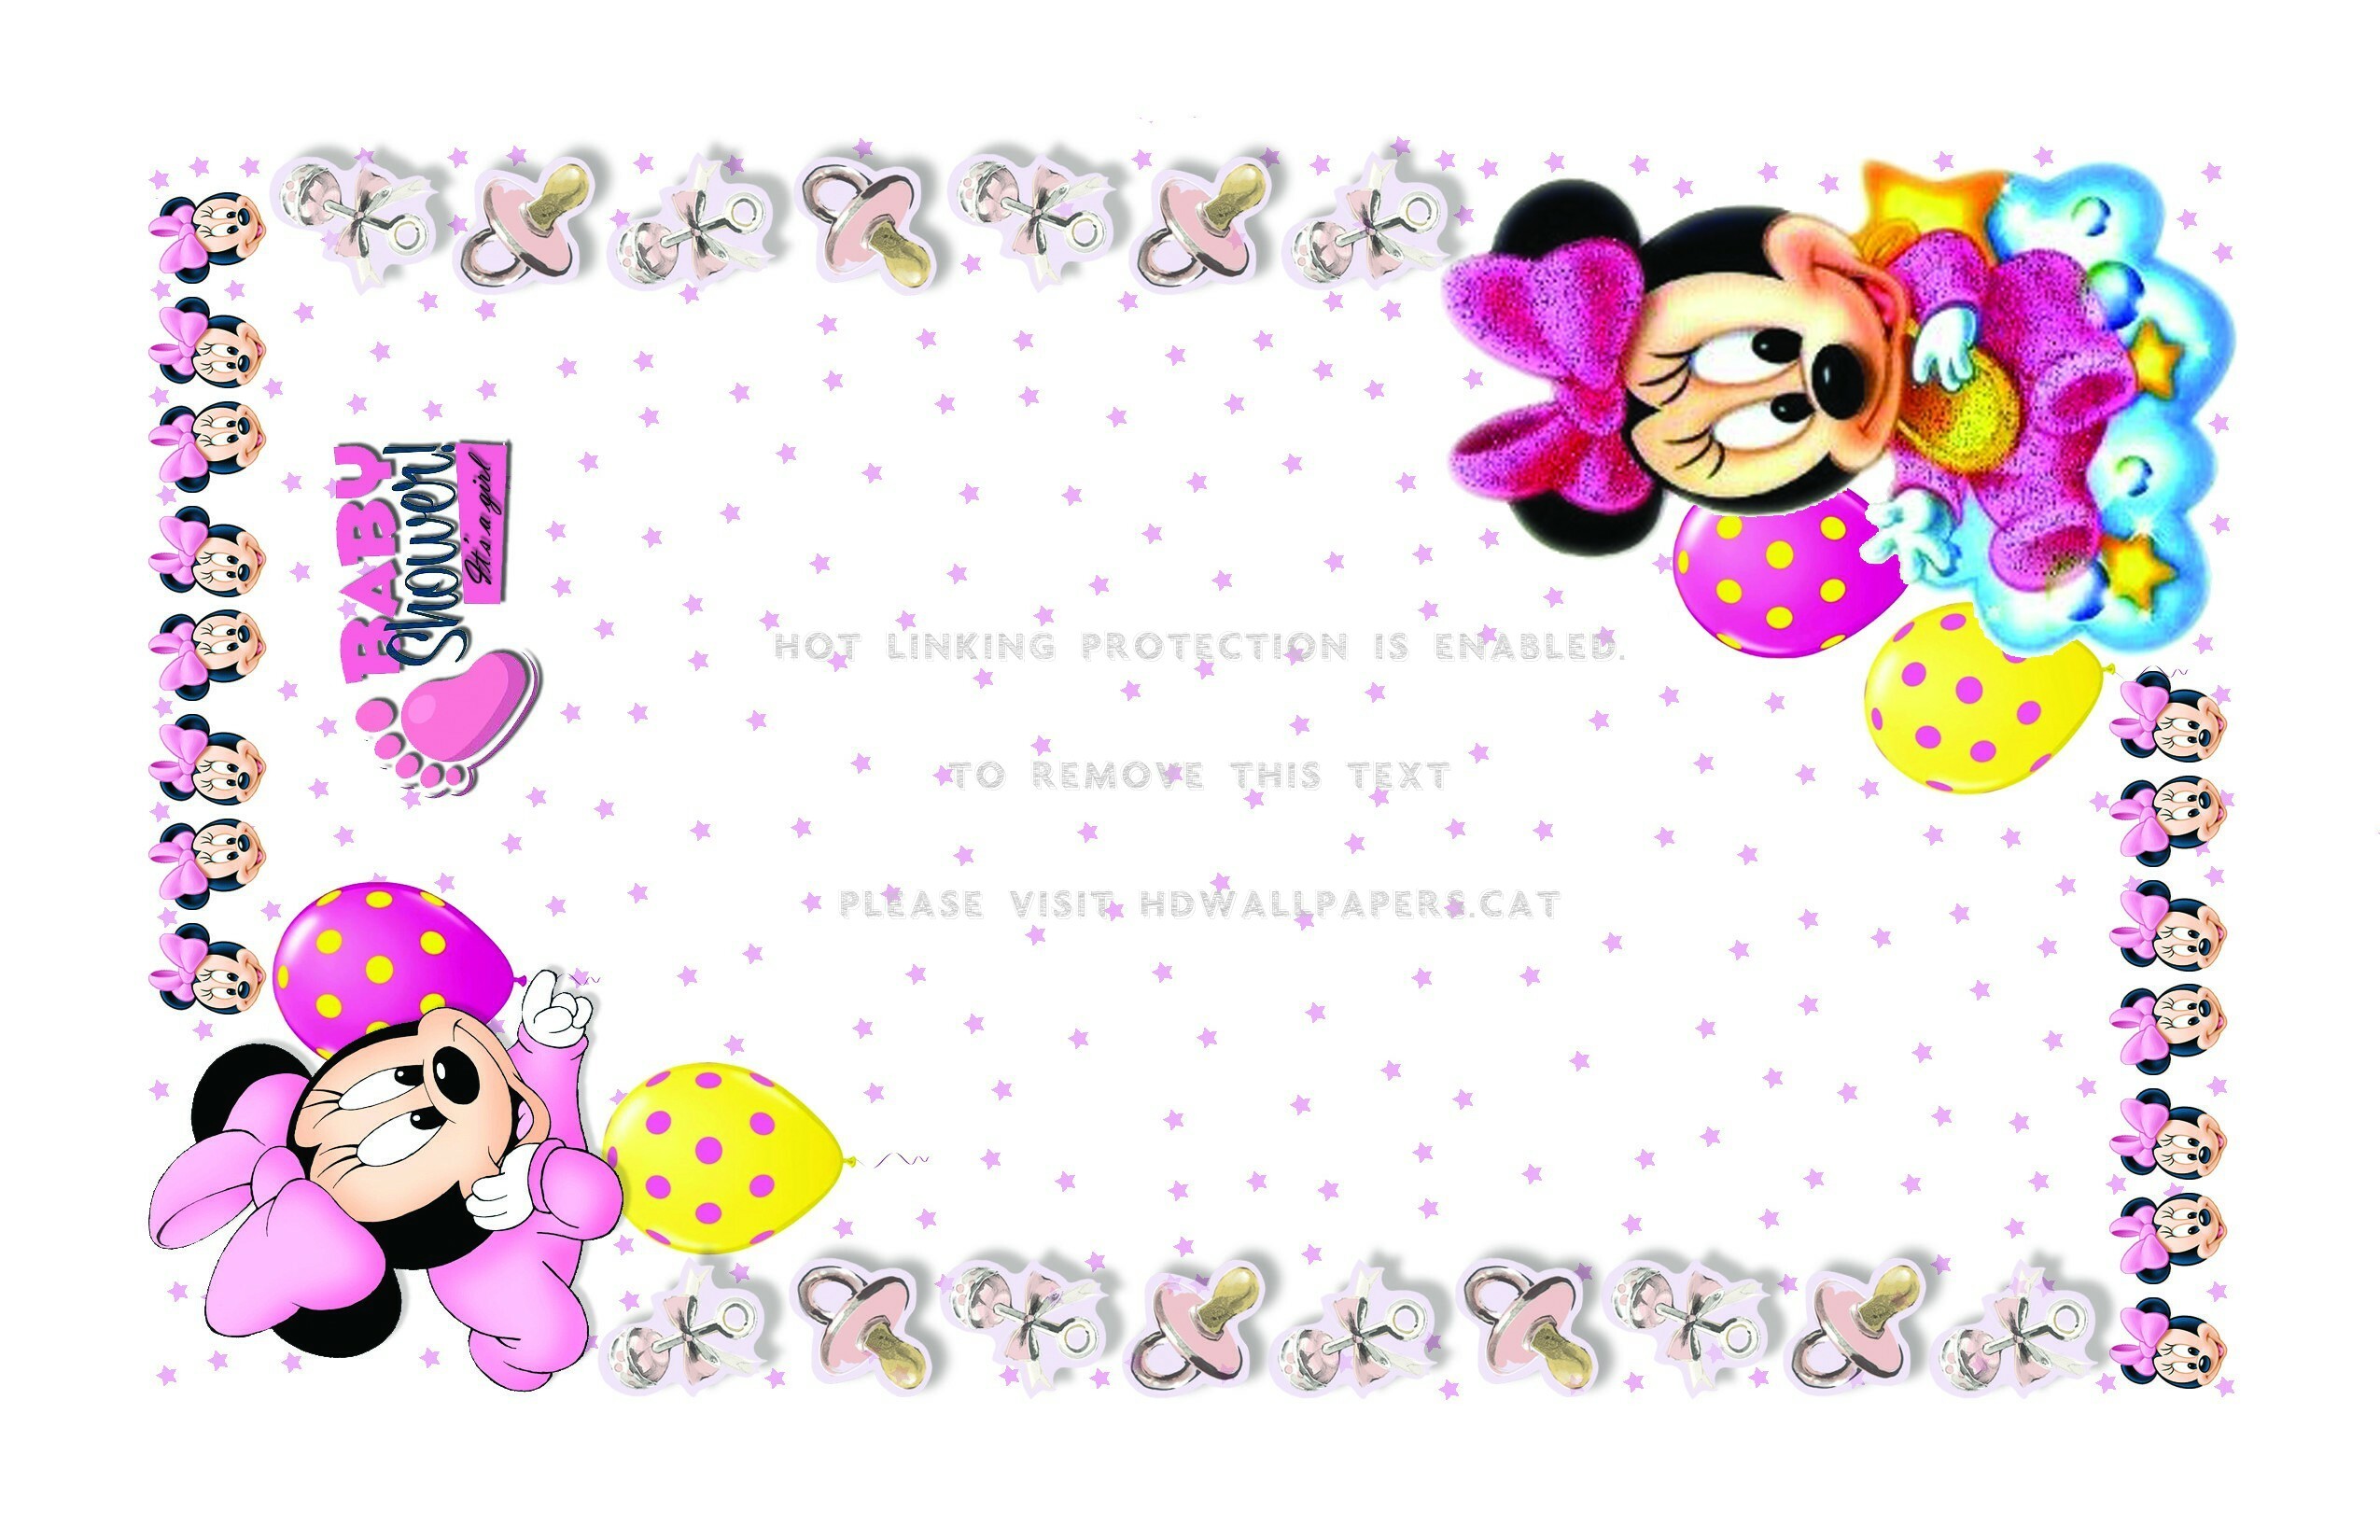 2550x1650 Source: hdwallpapers.cat Â· Report. Baby Minnie Mouse Wallpaper ...